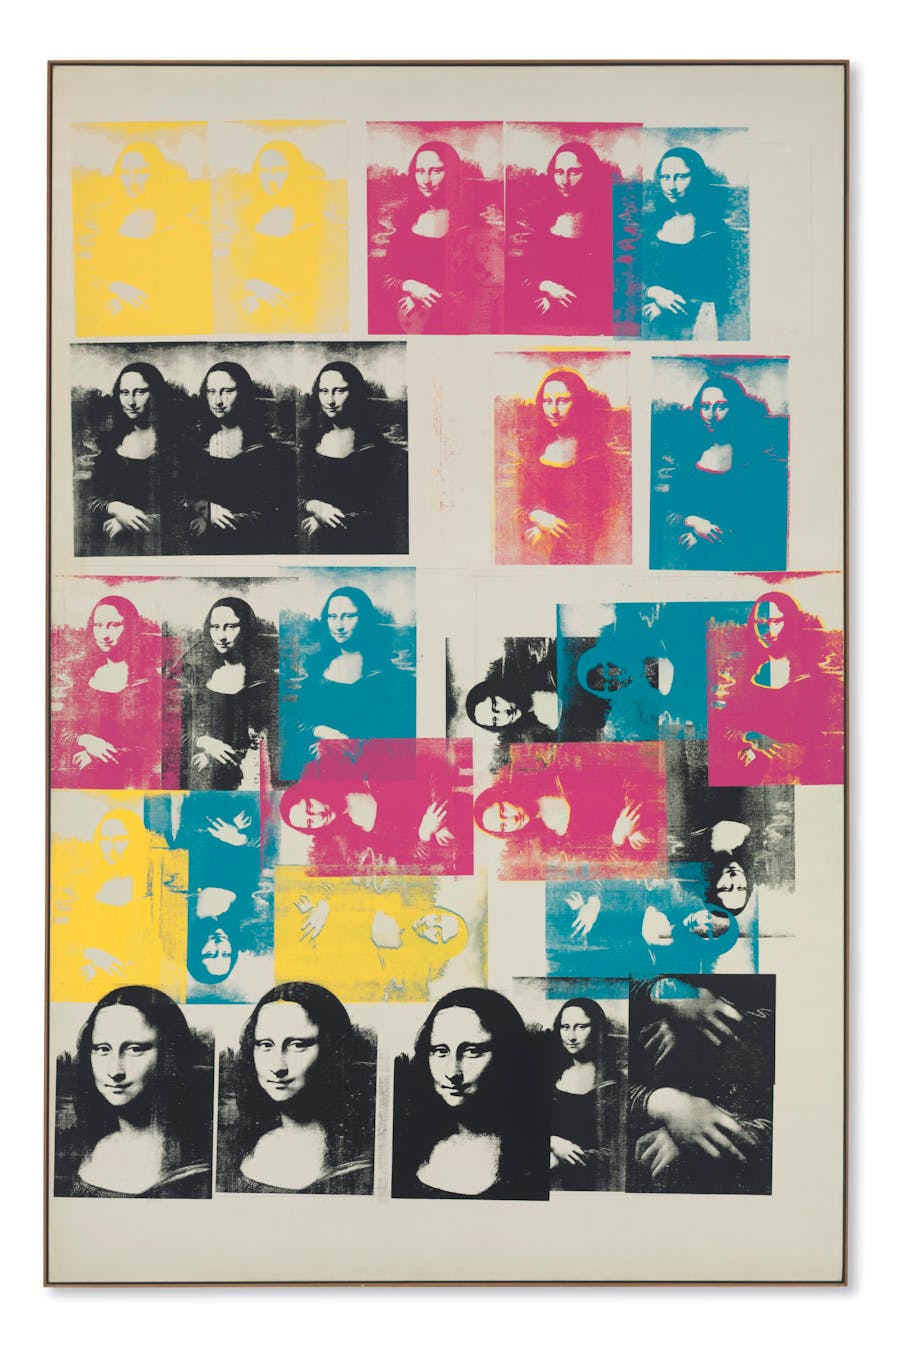 Andy Warhol (1928-1987), 'Colored Mona Lisa', 1963, screen print and graphite on canvas, 319.7 x 208.6 cm, signed and dated. Photo © Christie's